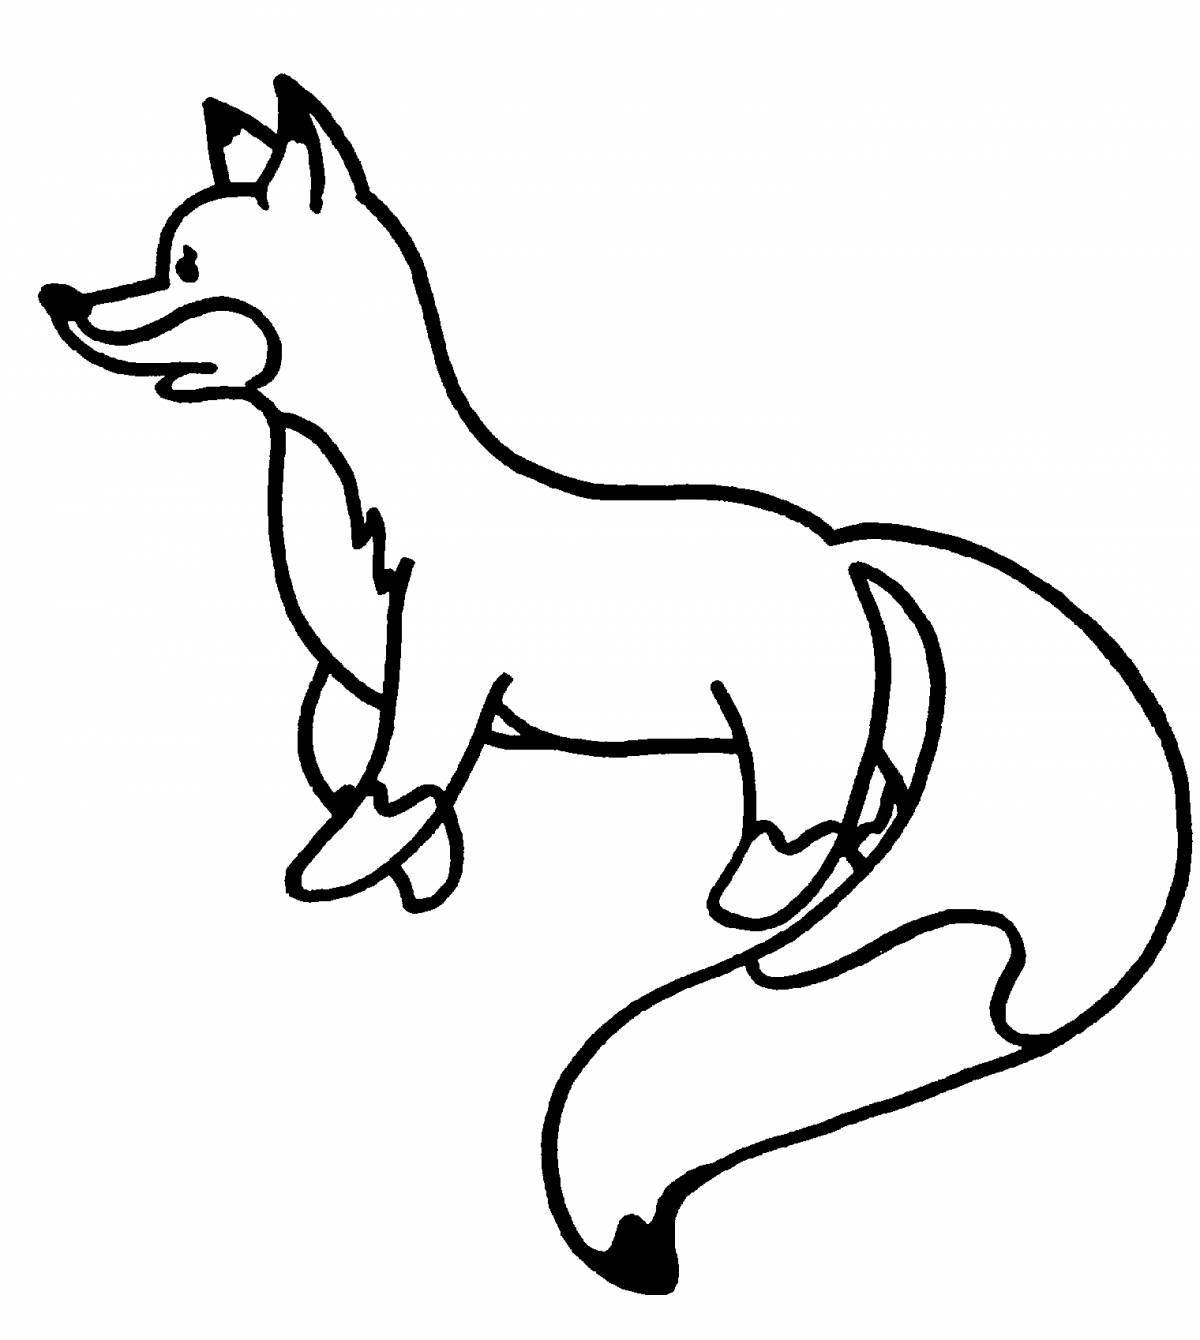 A fun coloring book with a fox for kids